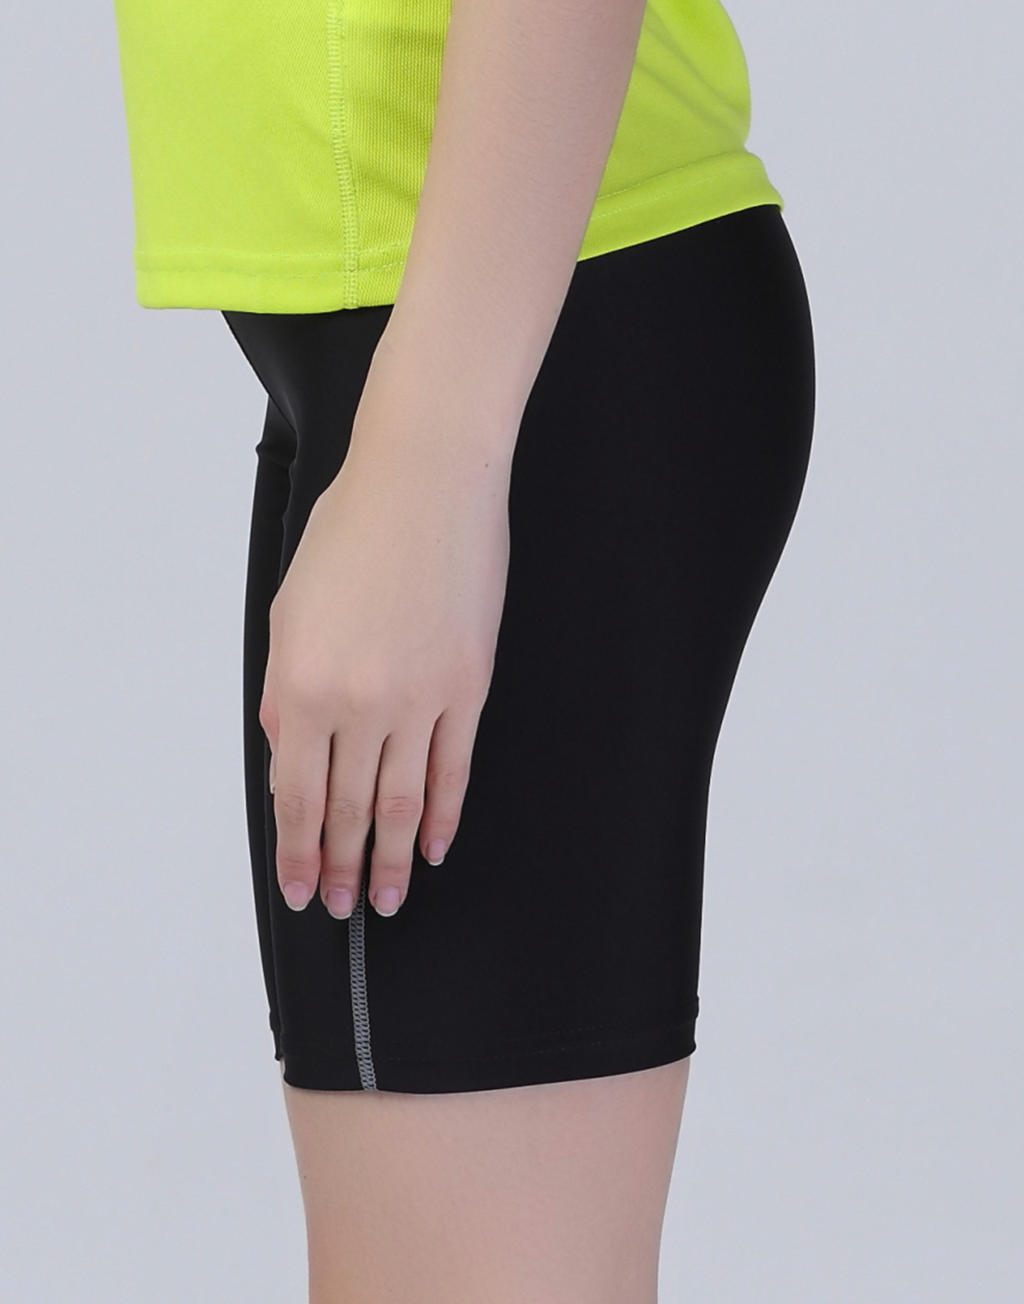  Womens Bodyfit Base Layer Shorts in Farbe Black